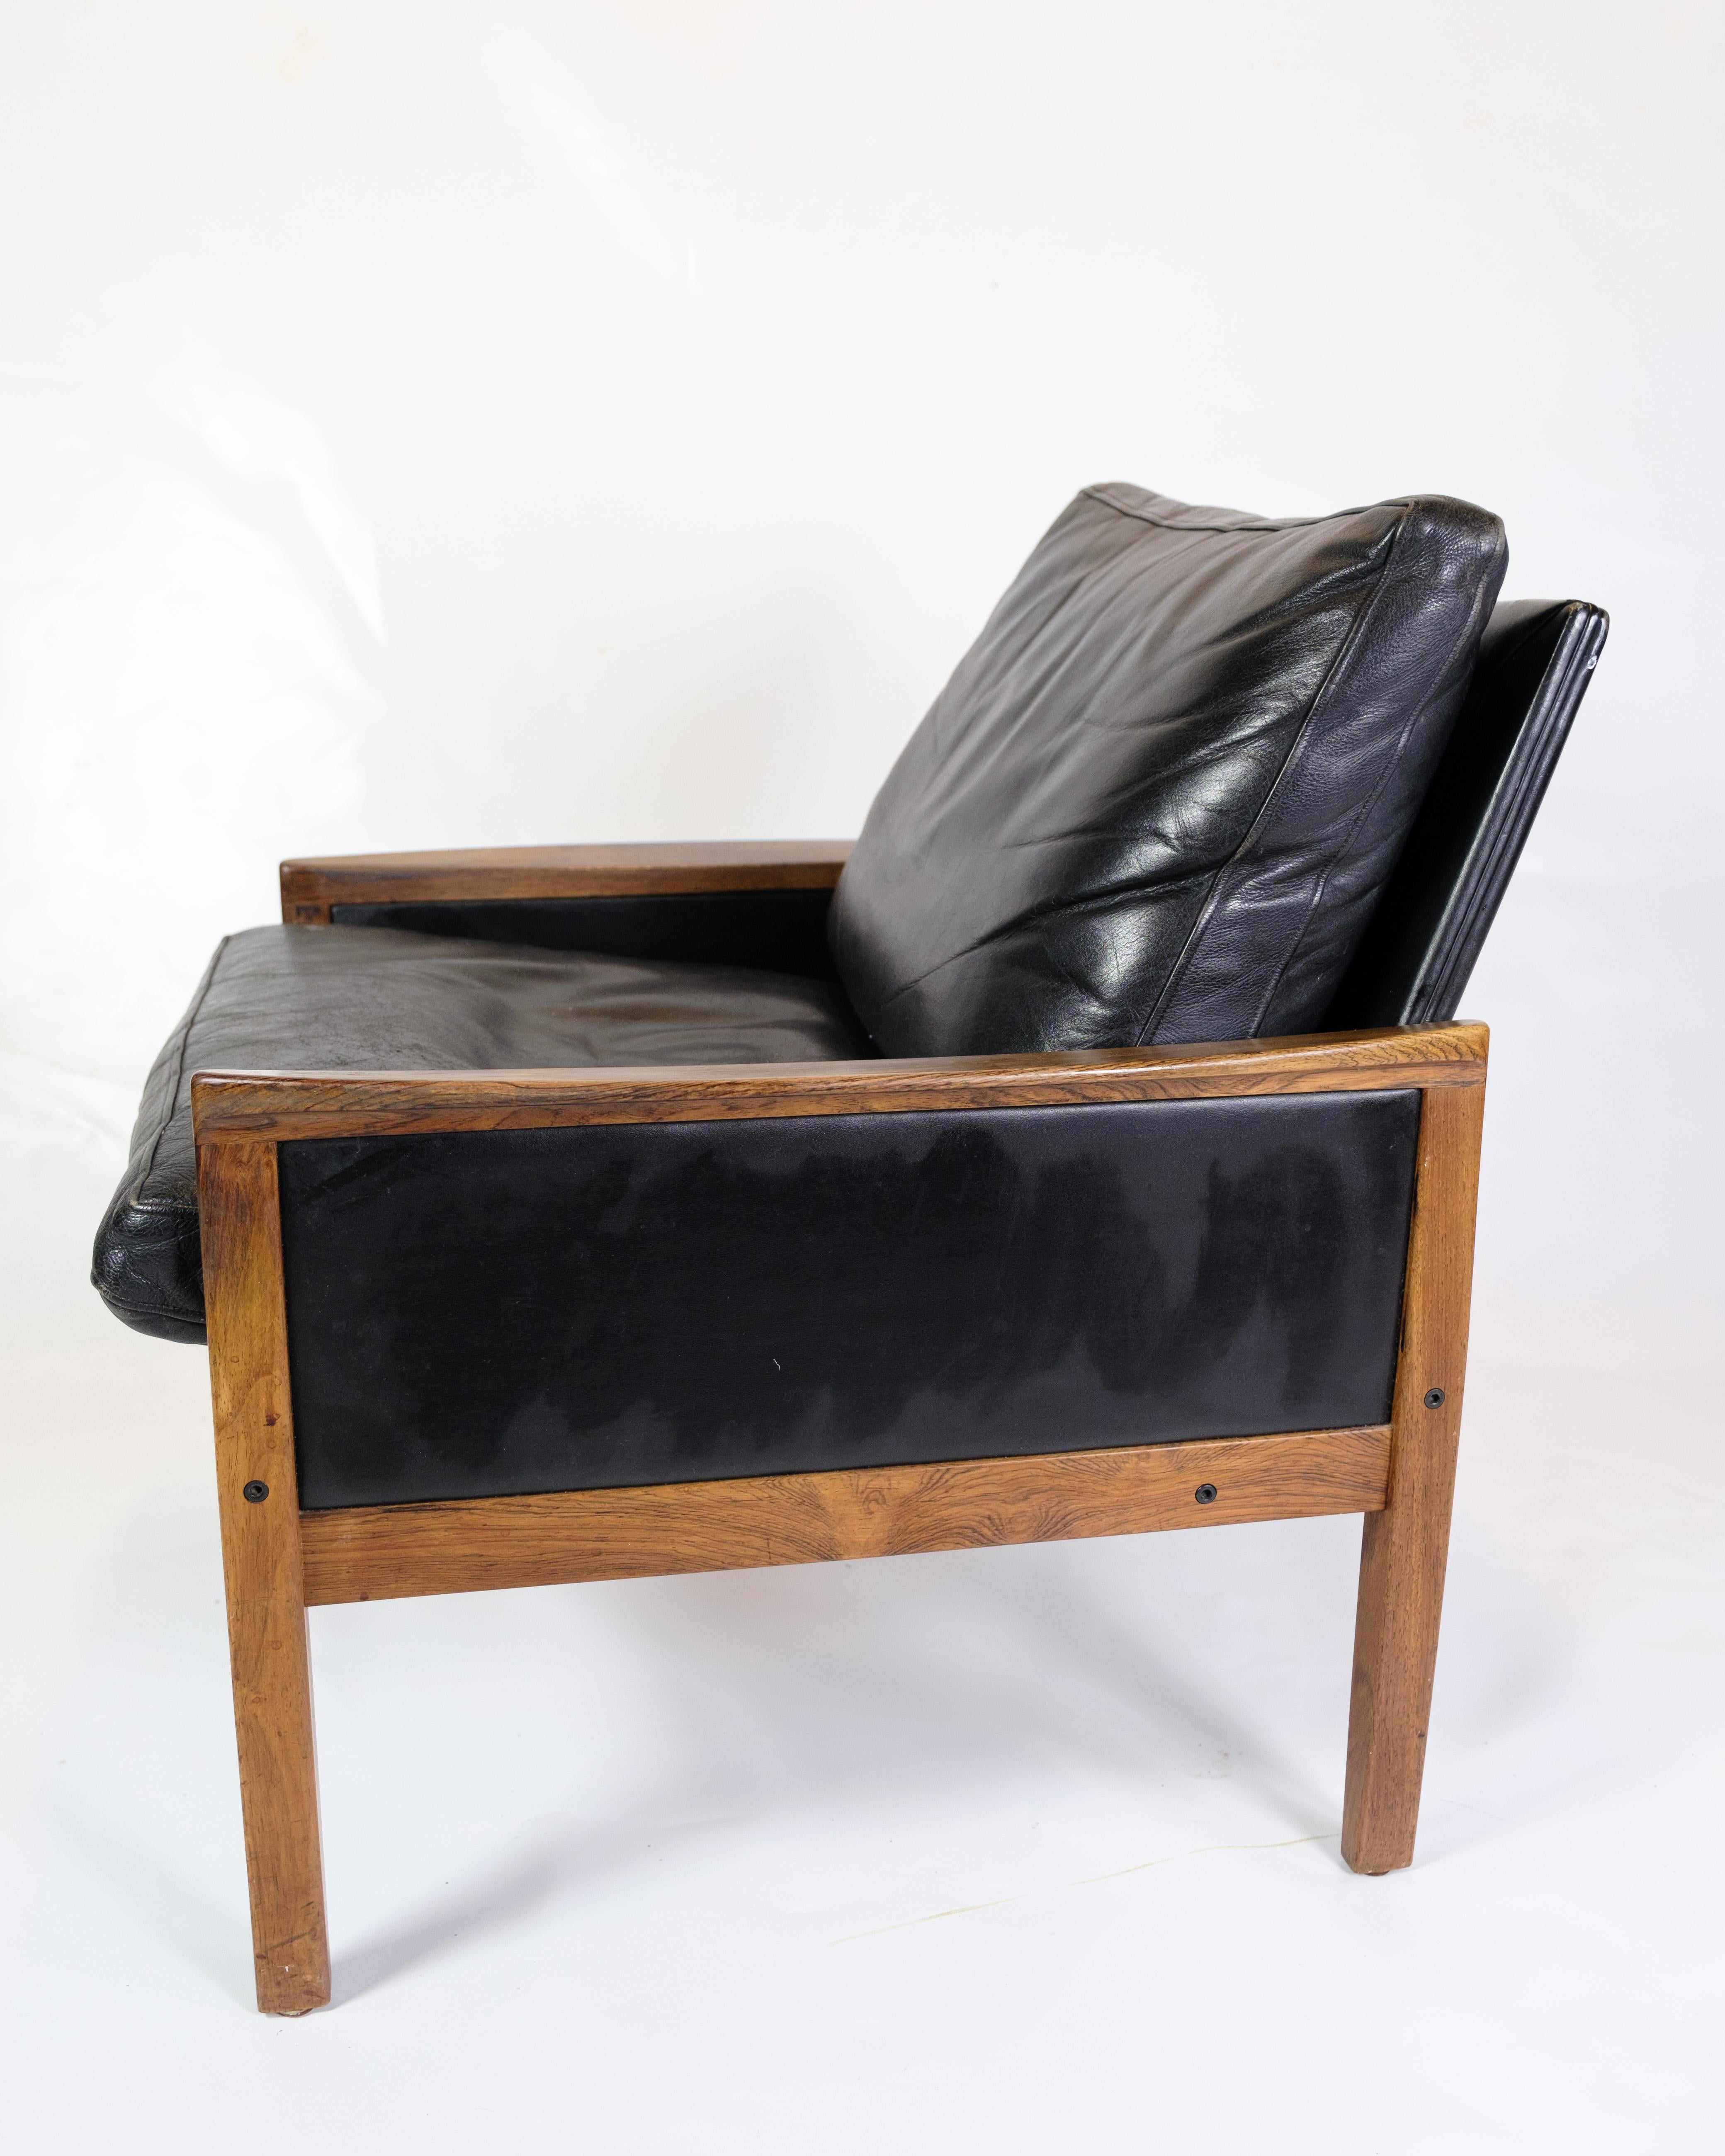 Leather 2 Armchairs Made In Rosewood By Hans Olsen Made By Brdr. Juul K. From 1960s